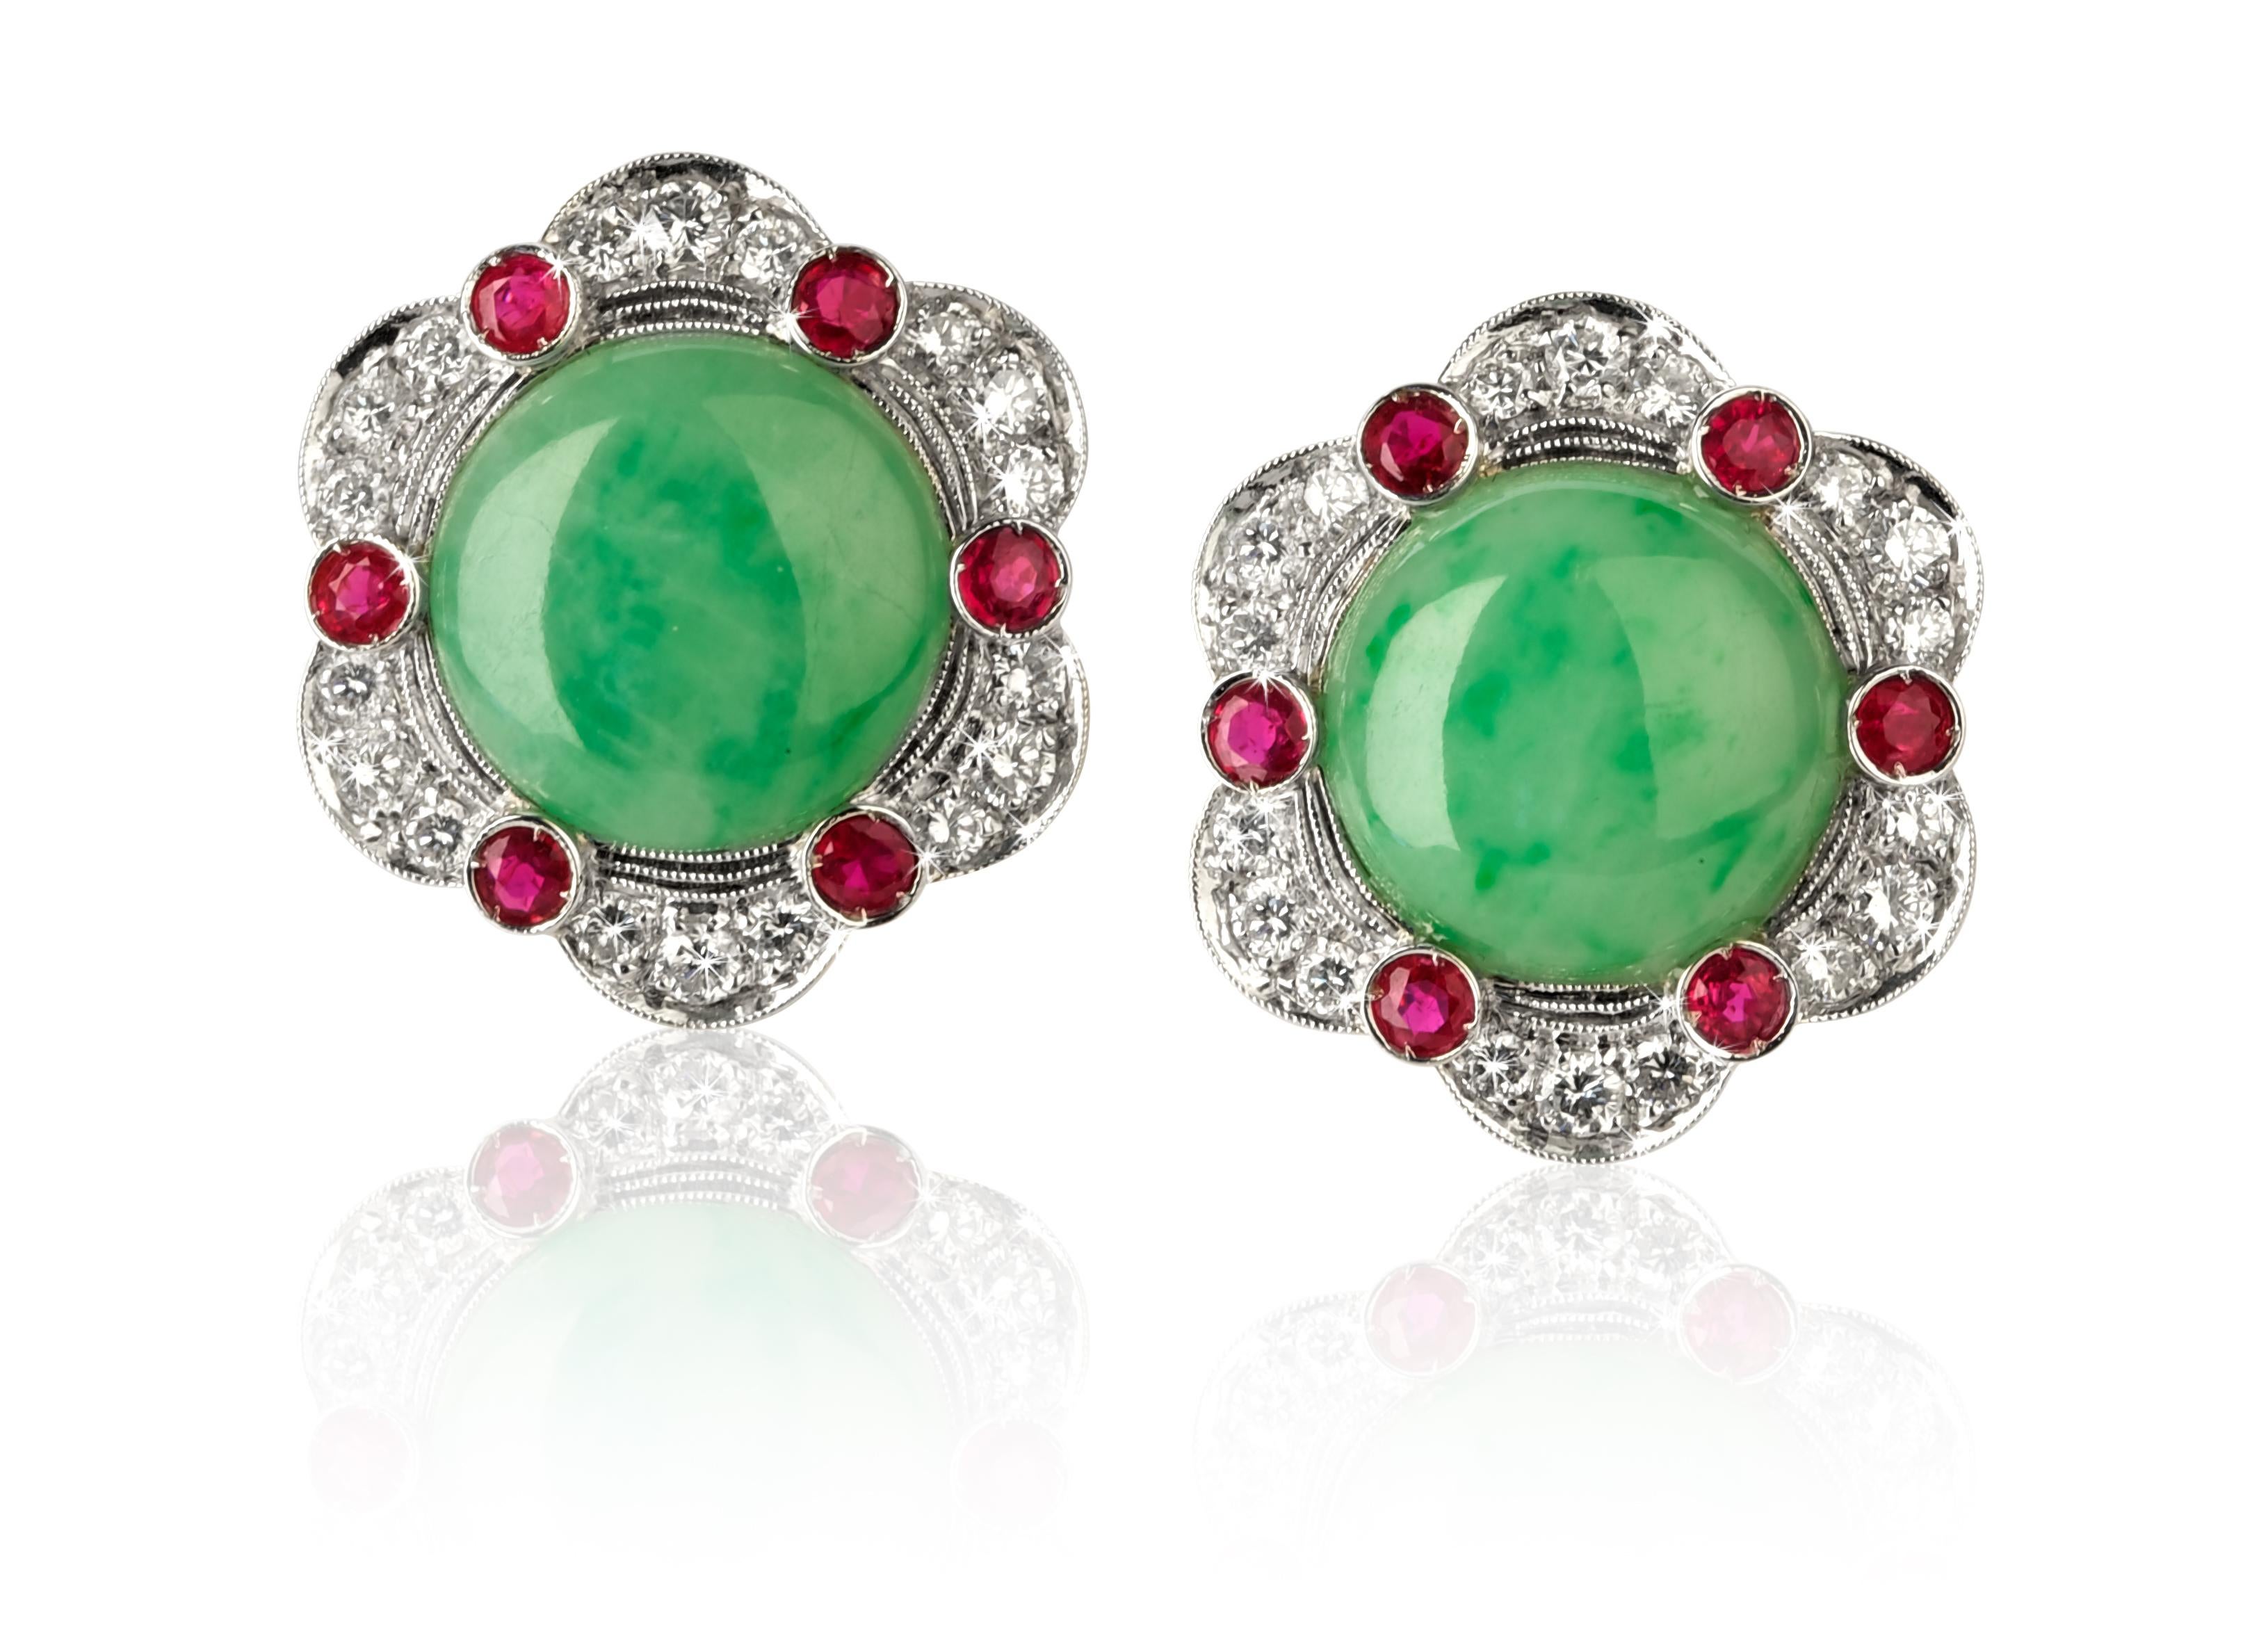 Classical Roman Vintage Jade Earrings From ANGELETTI PRIVATE COLLECTION Gold Diamonds Rubies For Sale